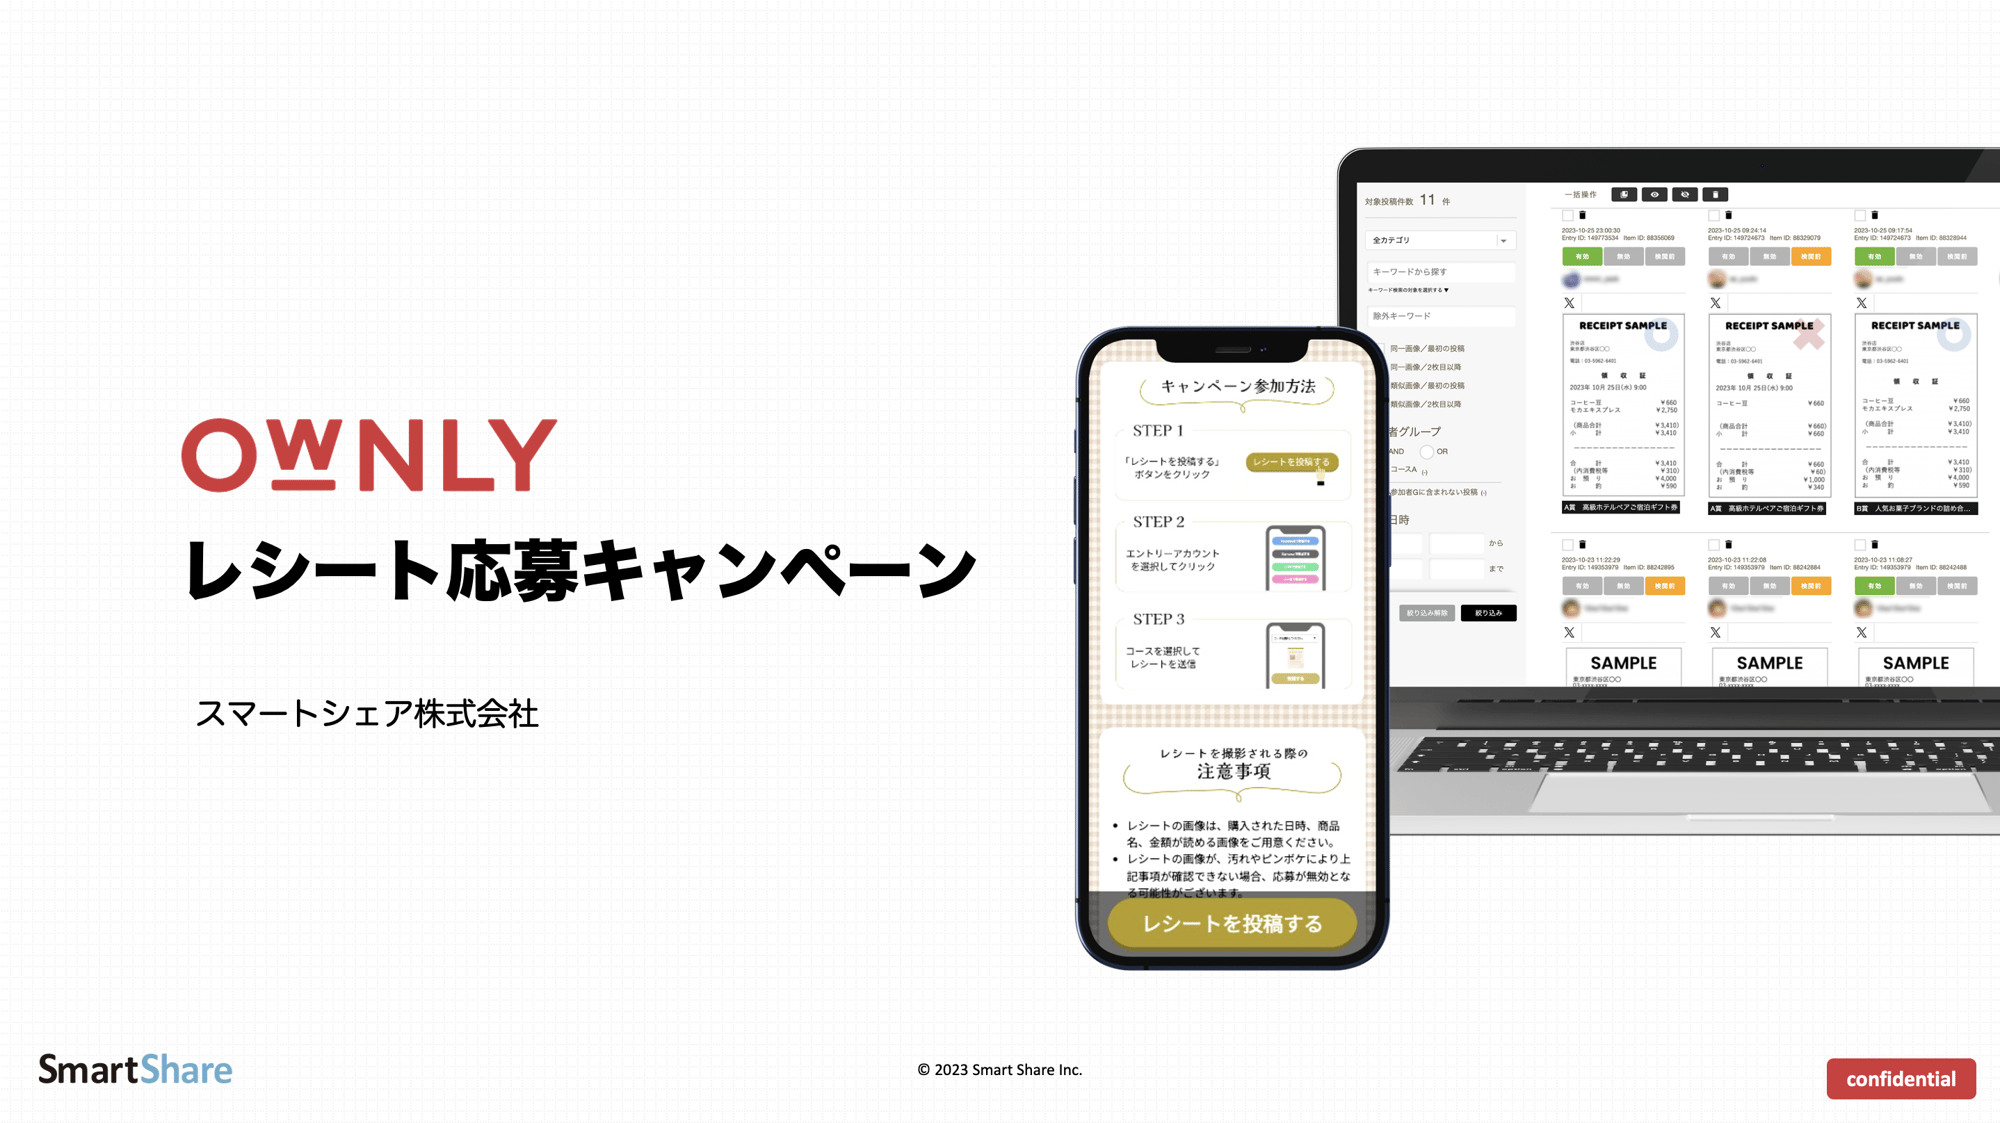 OWNLY レシート応募キャンペーン